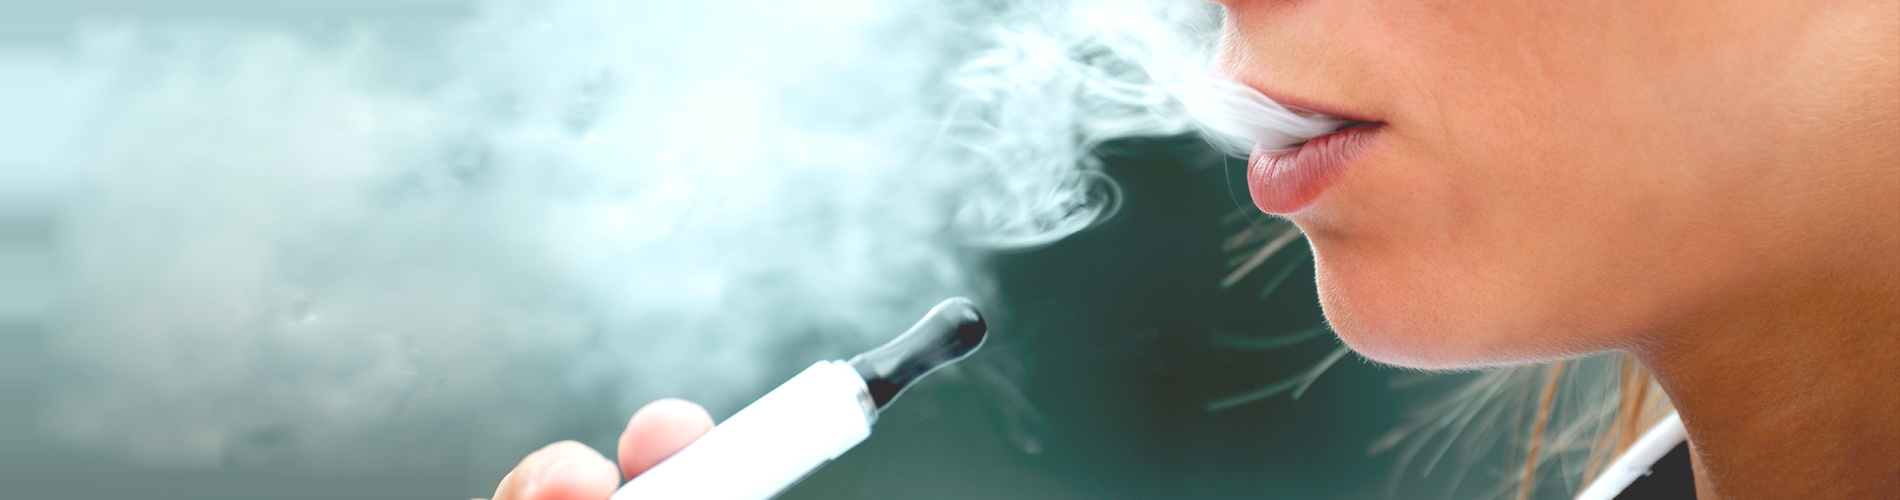 Teen E-Cig Use is Troubling